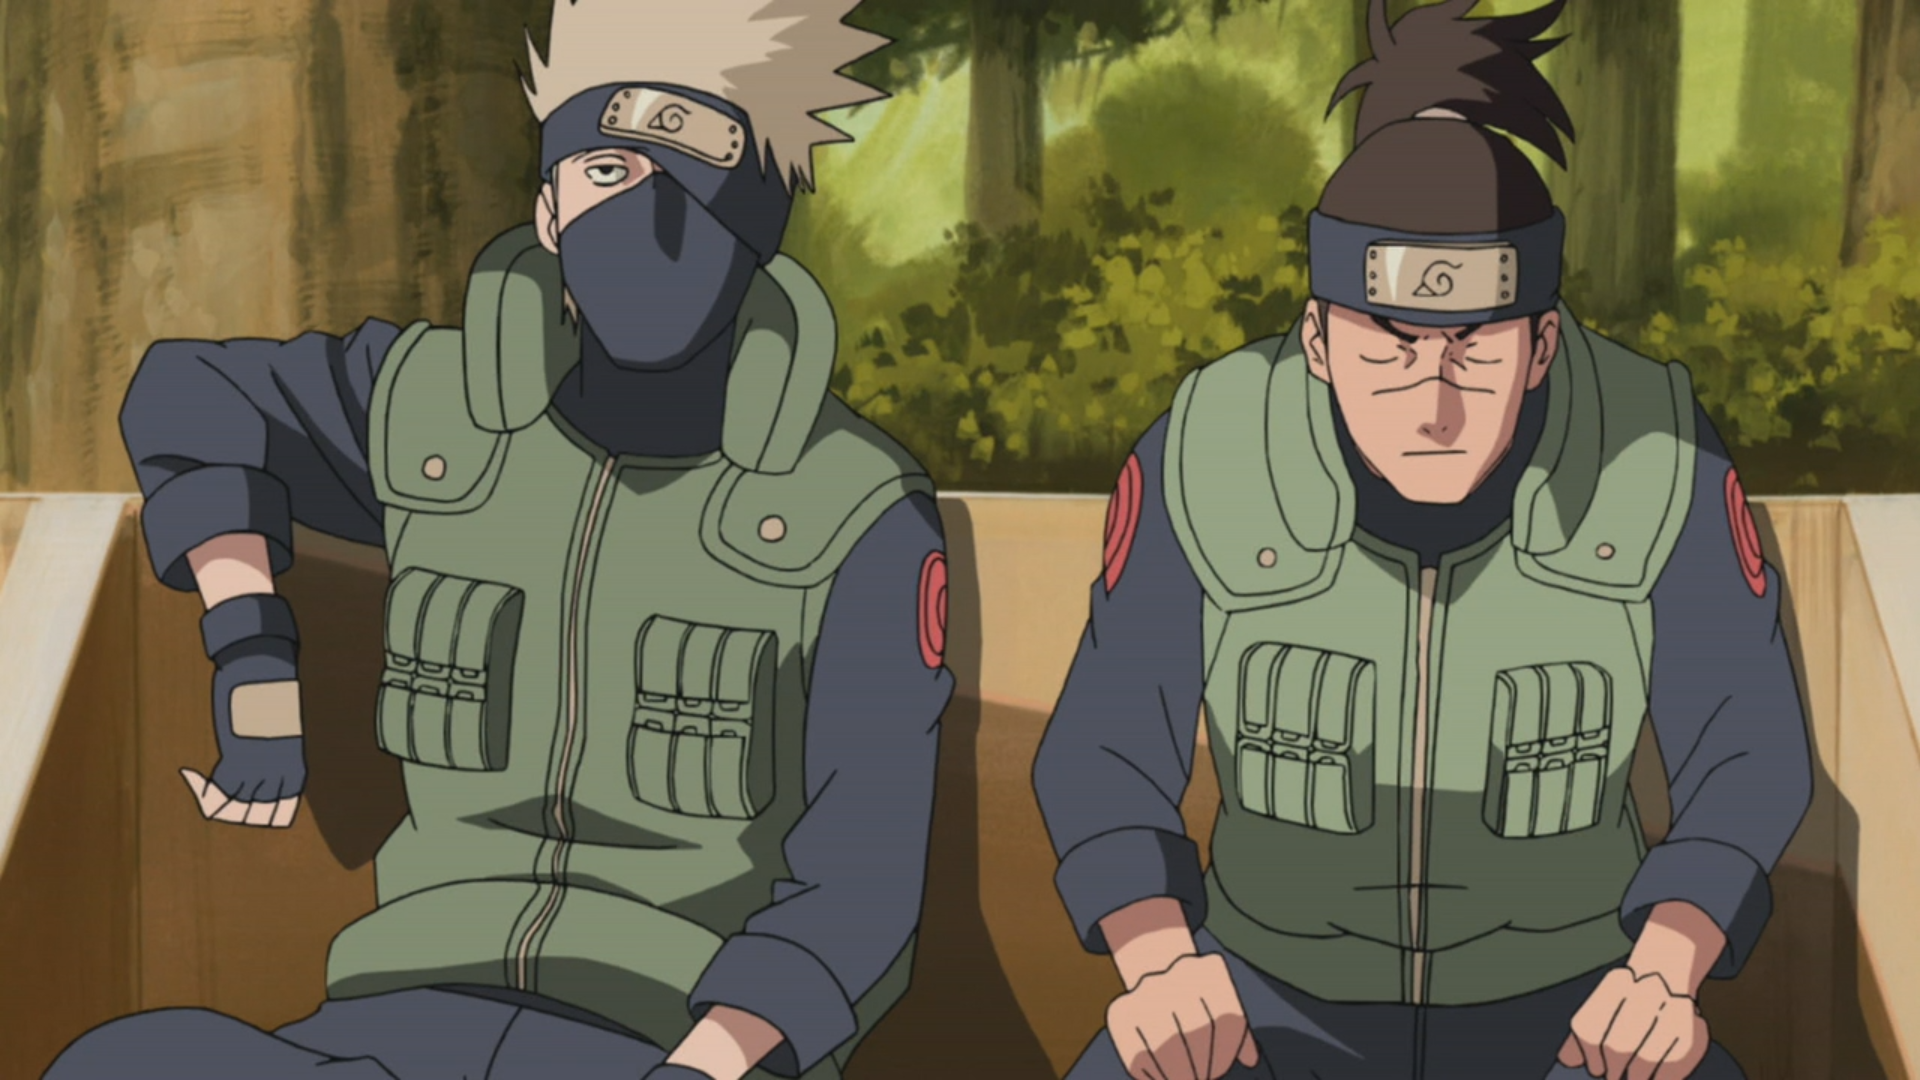 Naruto: Iruka Voice Actor Hospitalized in Japan for COVID-19